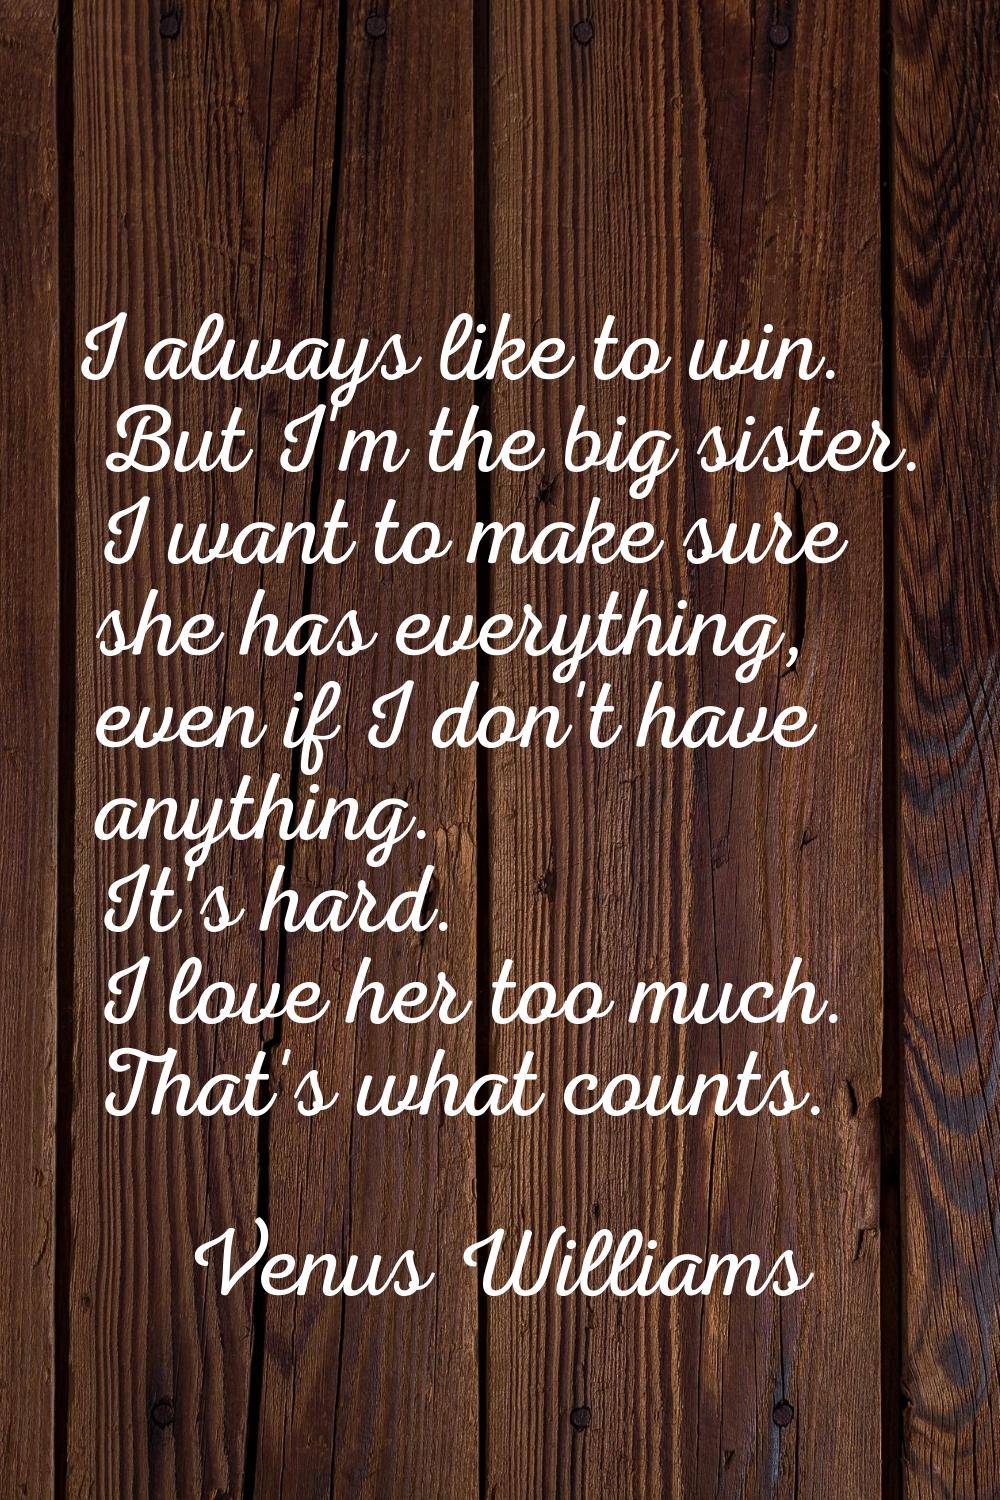 I always like to win. But I'm the big sister. I want to make sure she has everything, even if I don